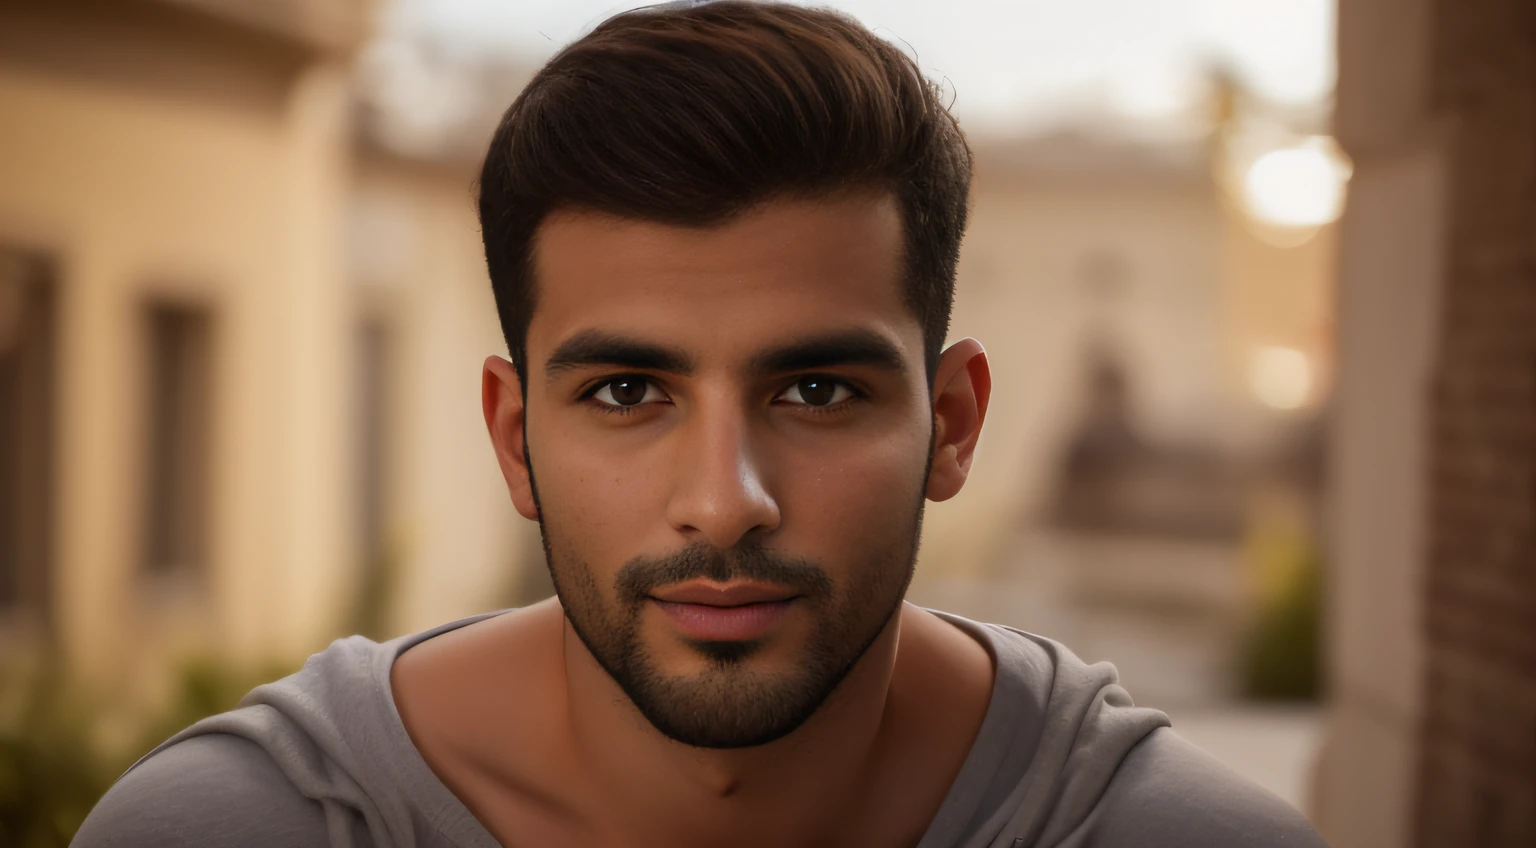 30-year-old man from Algeria, bearded, Very beauthful, looking-into-camera, detailled image, uhd, 16K, well-lit